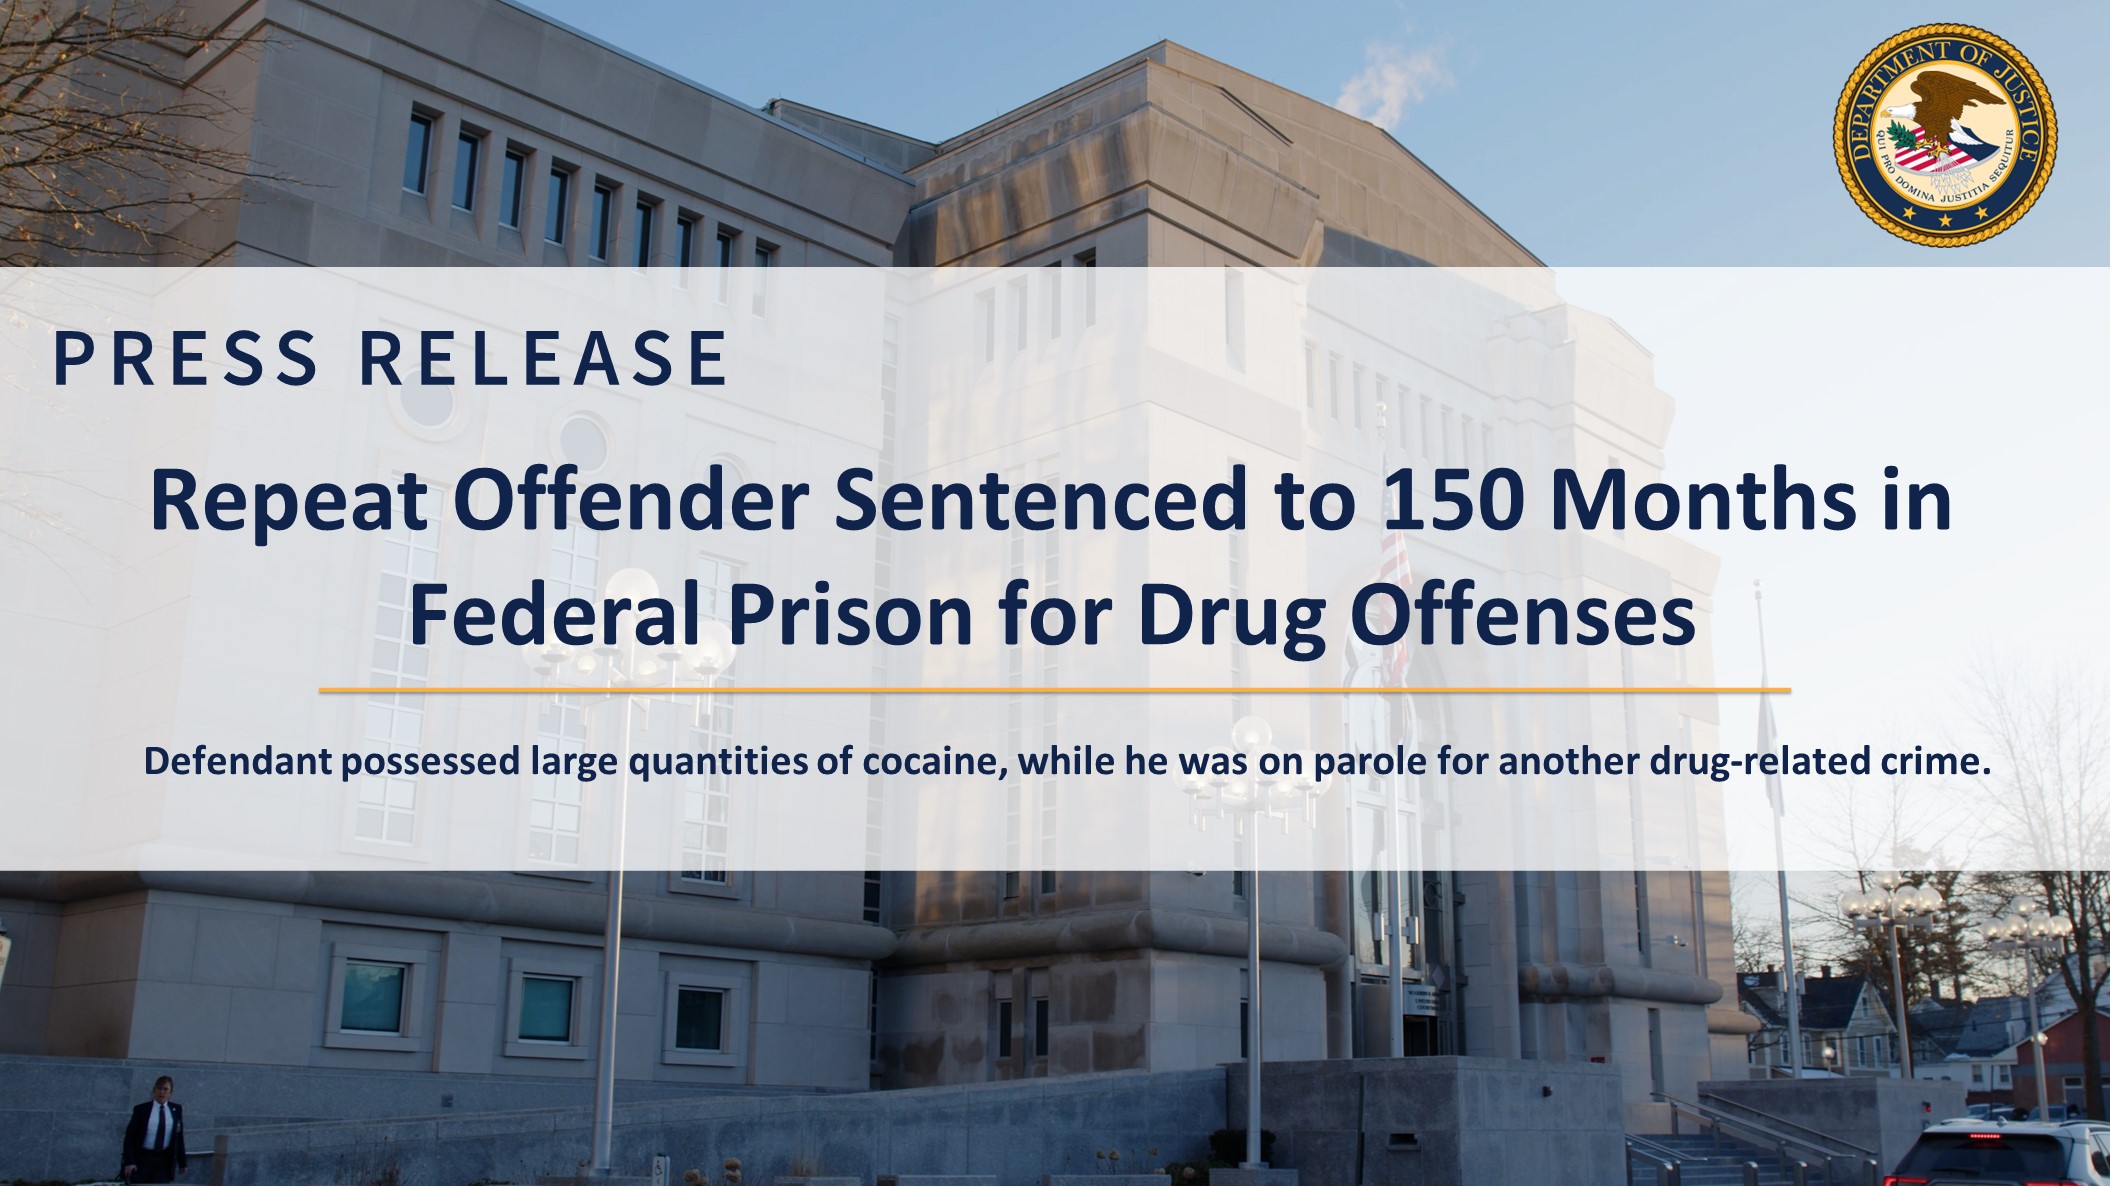 Press Release Repeat Offender Sentenced to 150 Months in Federal Prison for Drug Offenses Defendant possessed large quantities of cocaine, while he was on parole for another drug-related crime